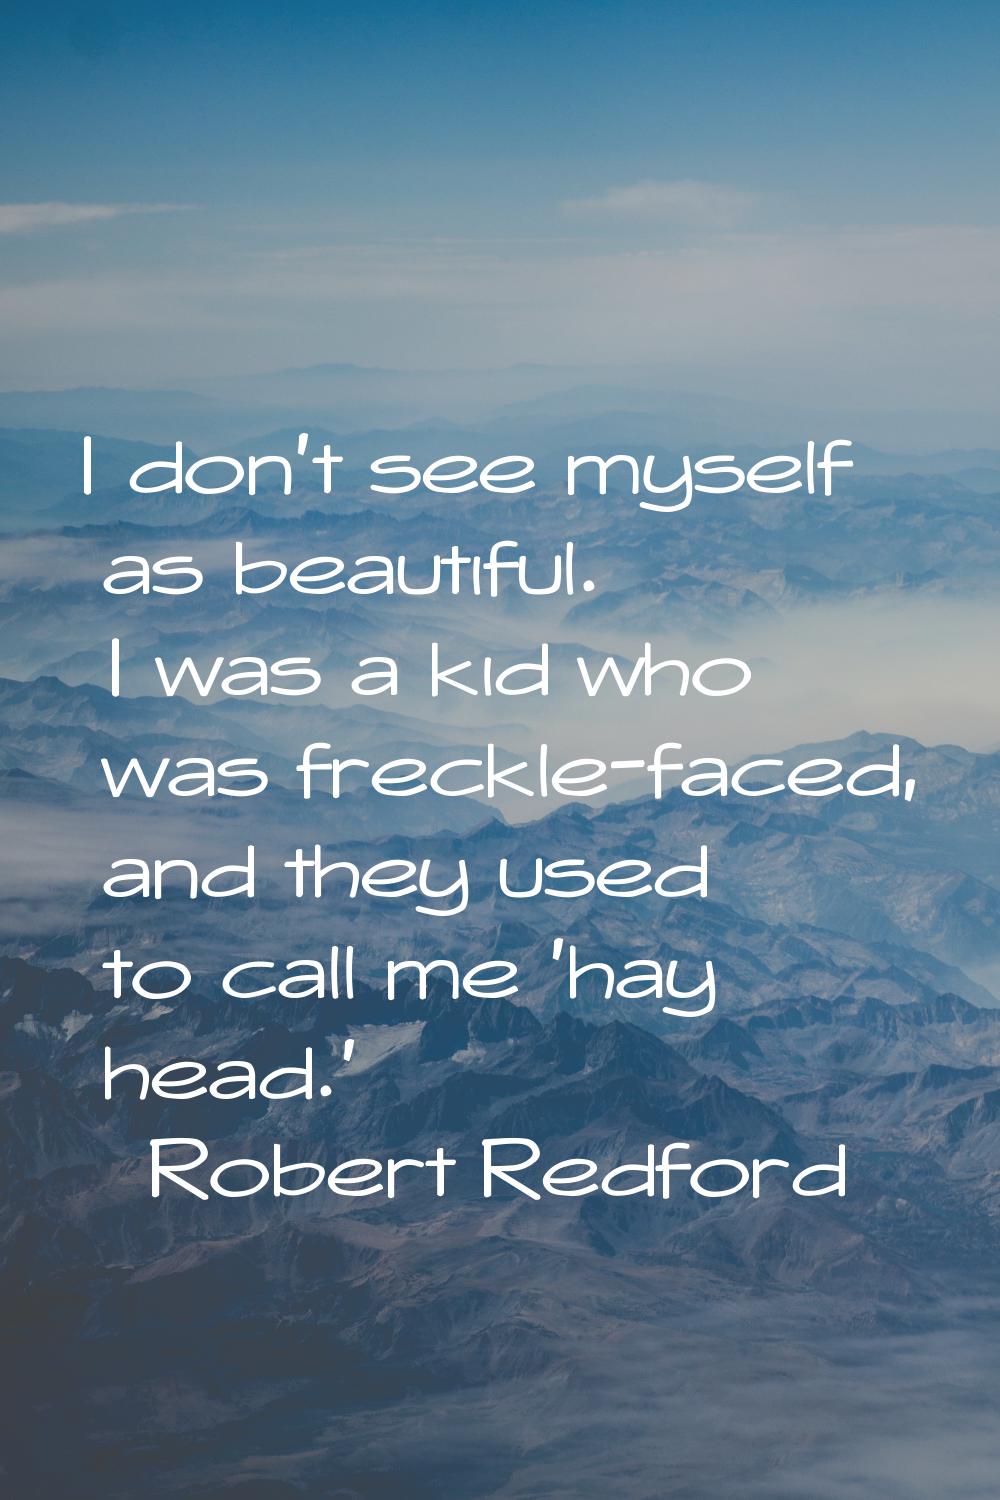 I don't see myself as beautiful. I was a kid who was freckle-faced, and they used to call me 'hay h